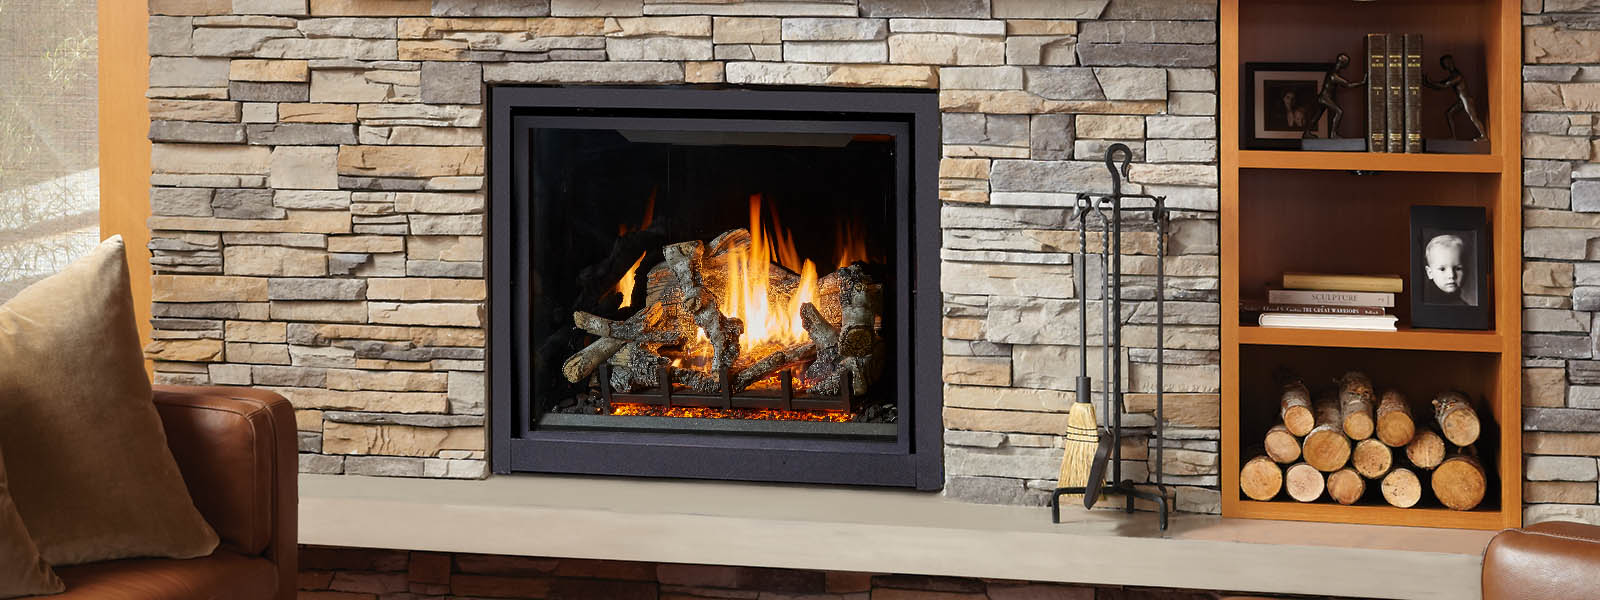 FireplaceX Traditional Probuilder Gas Fireplaces